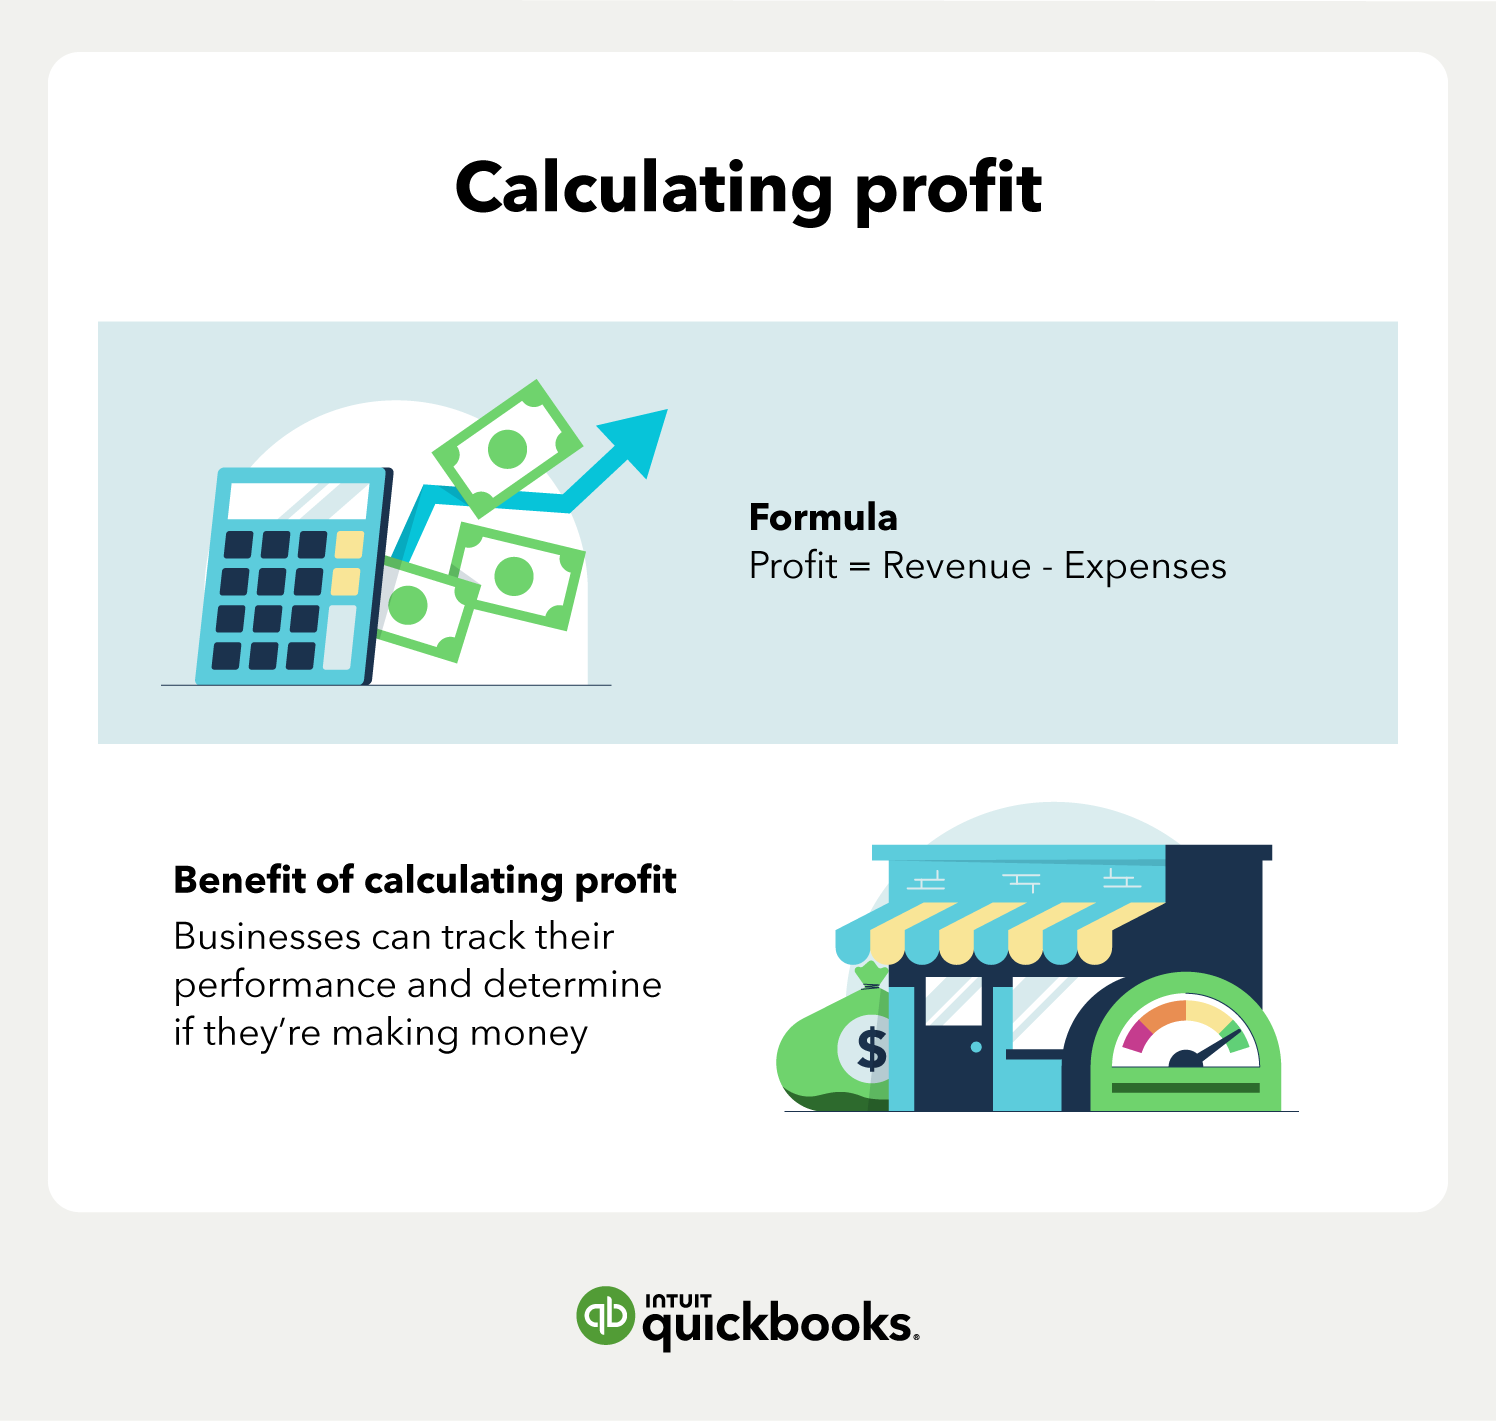 Formula and benefits of calculating profit with an image of a calculator and a business store-front